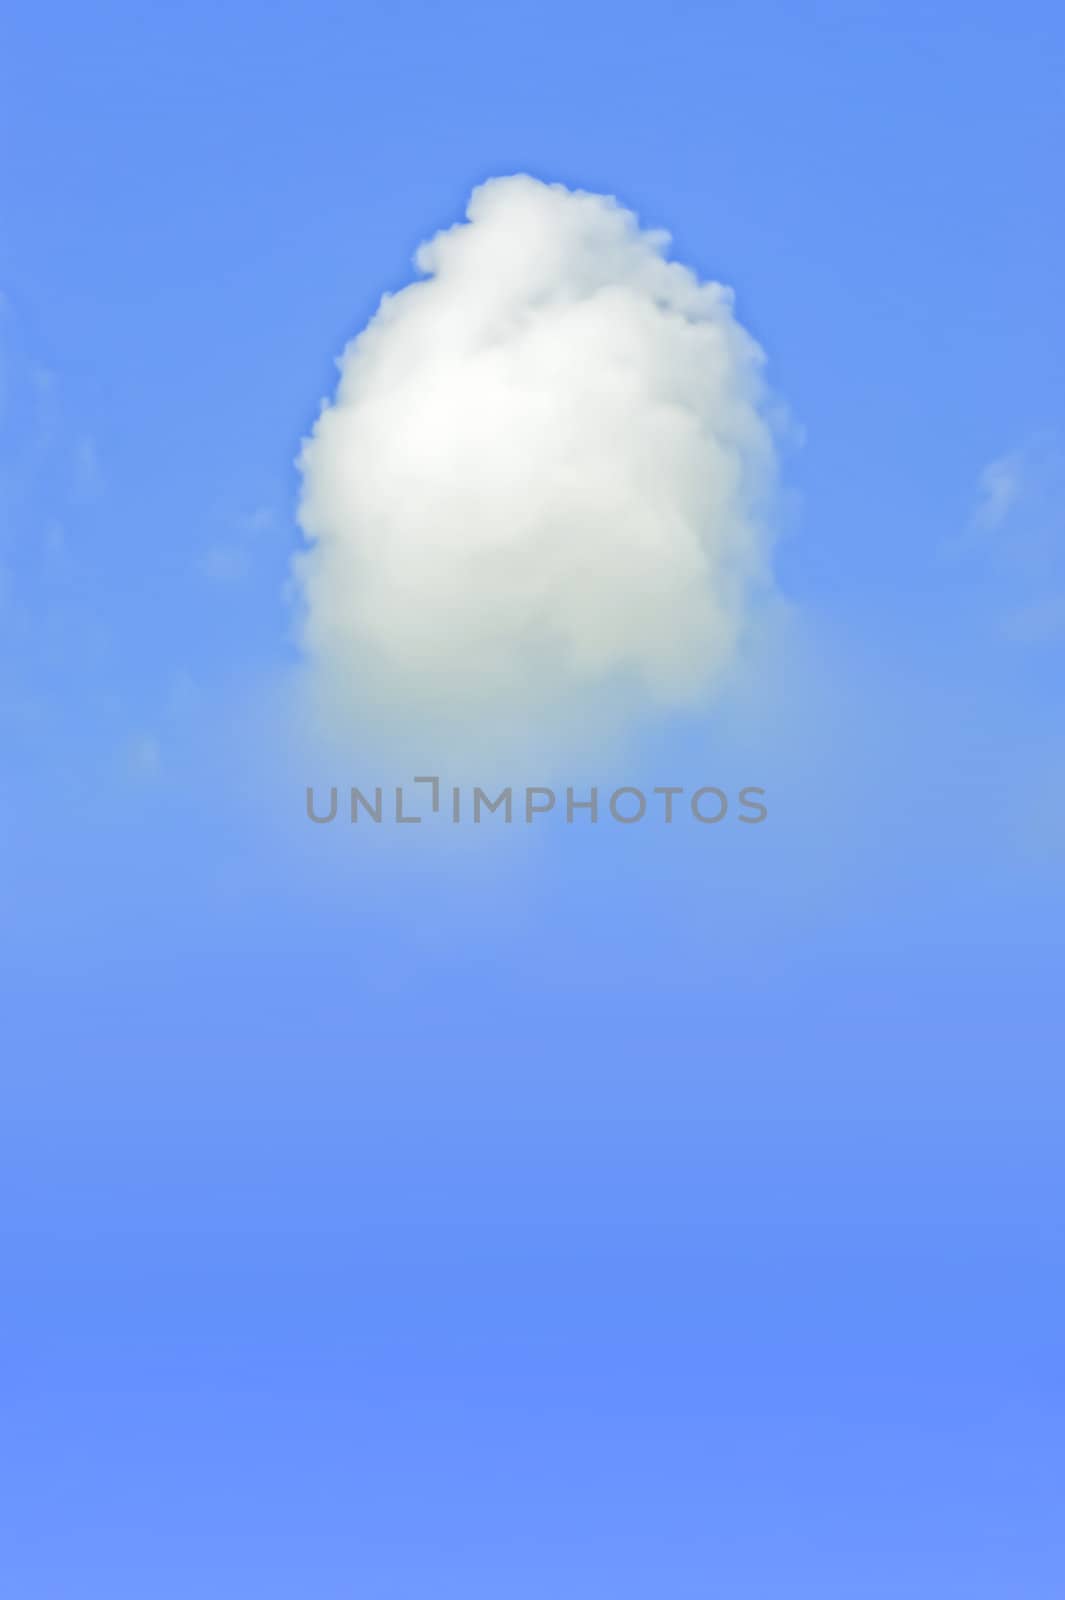 The beautiful white clouds and blue sky